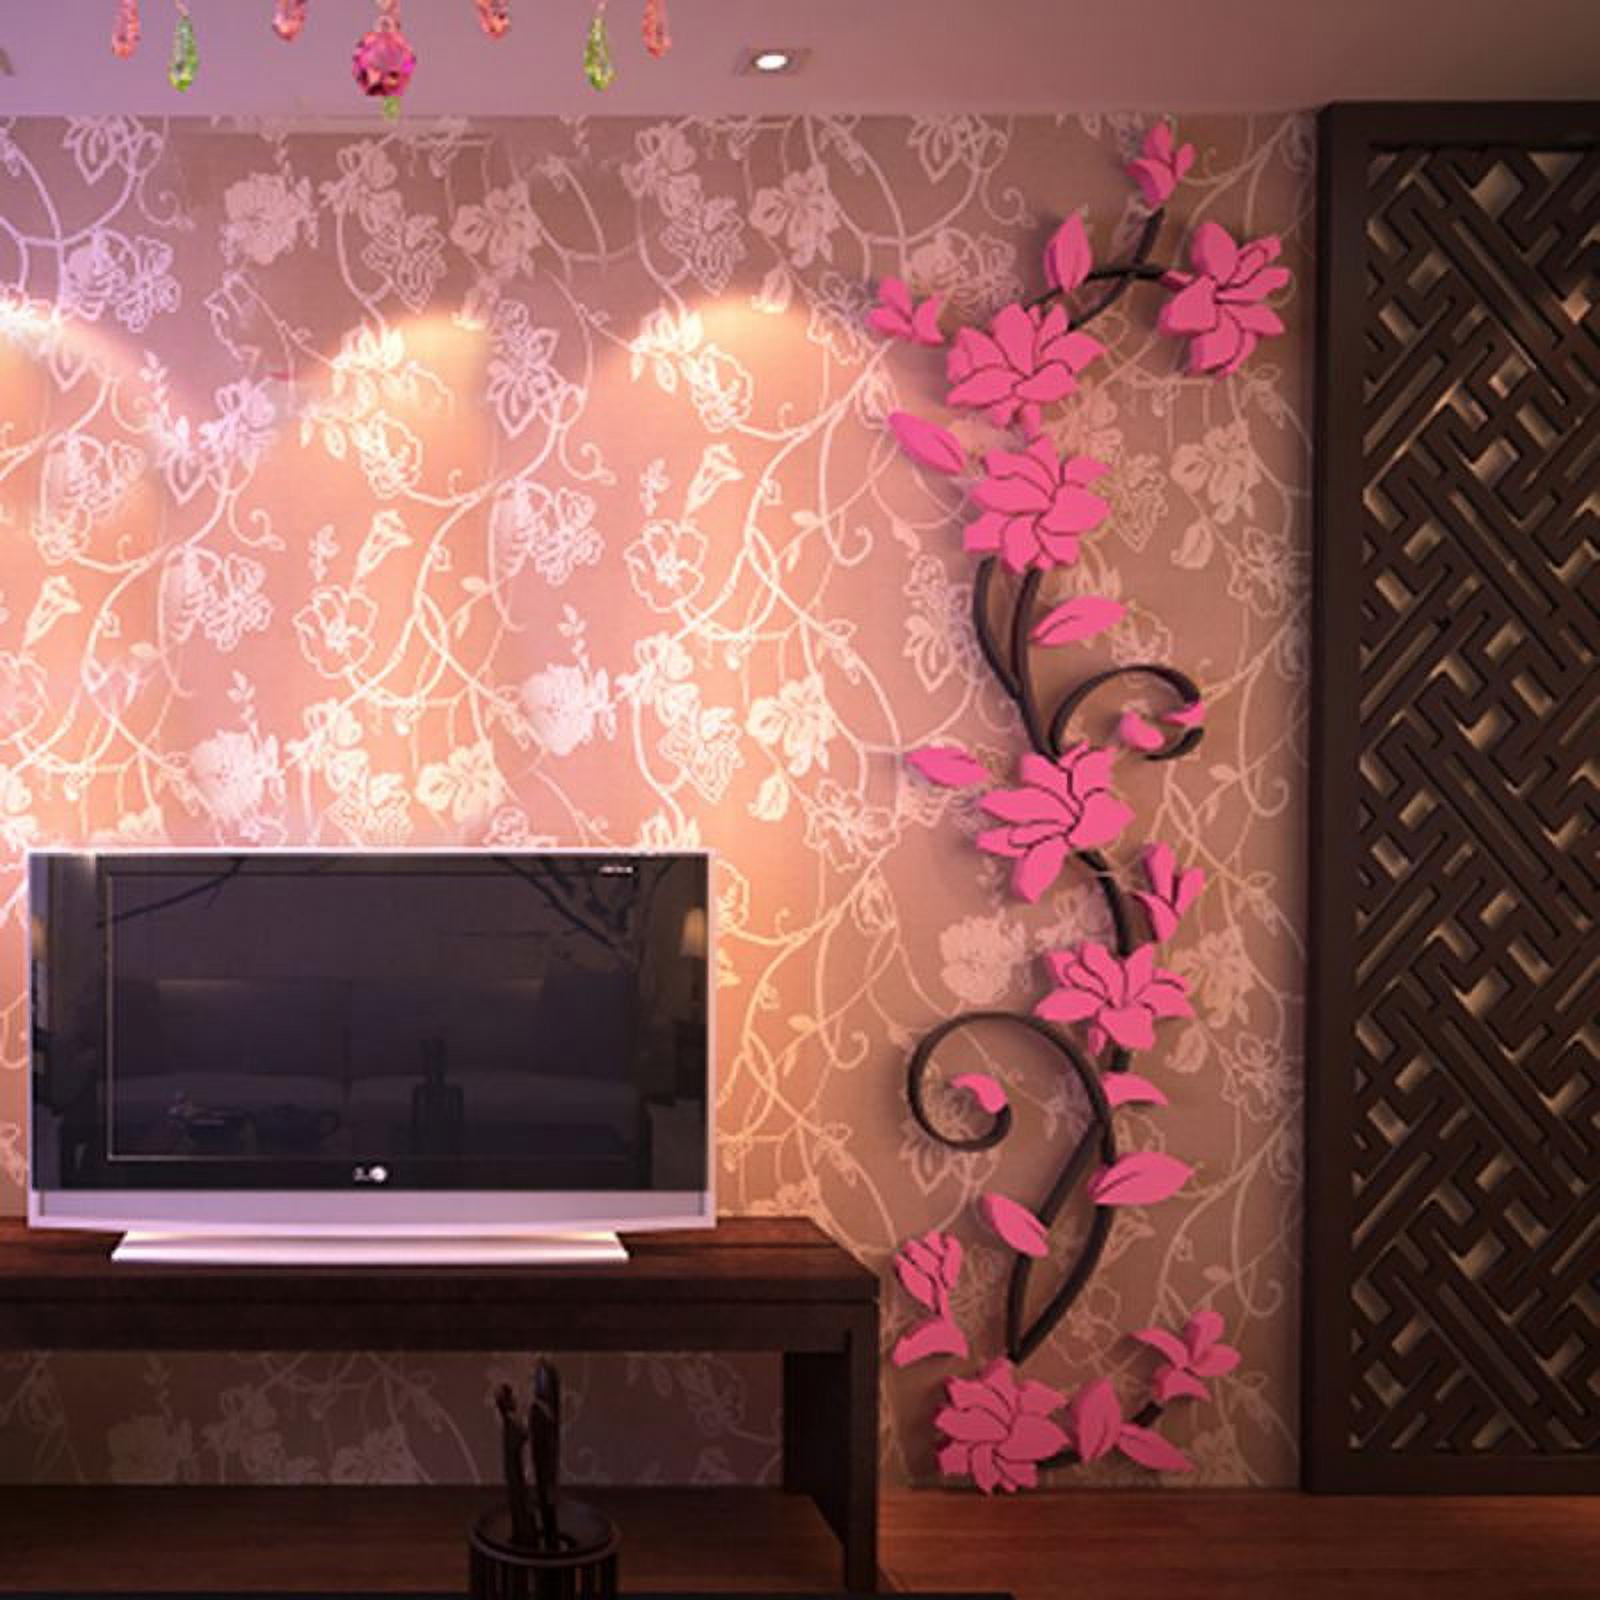 DIY 3D Crystal Arcylic Wall Stickers Modern Removable Wall Art ...